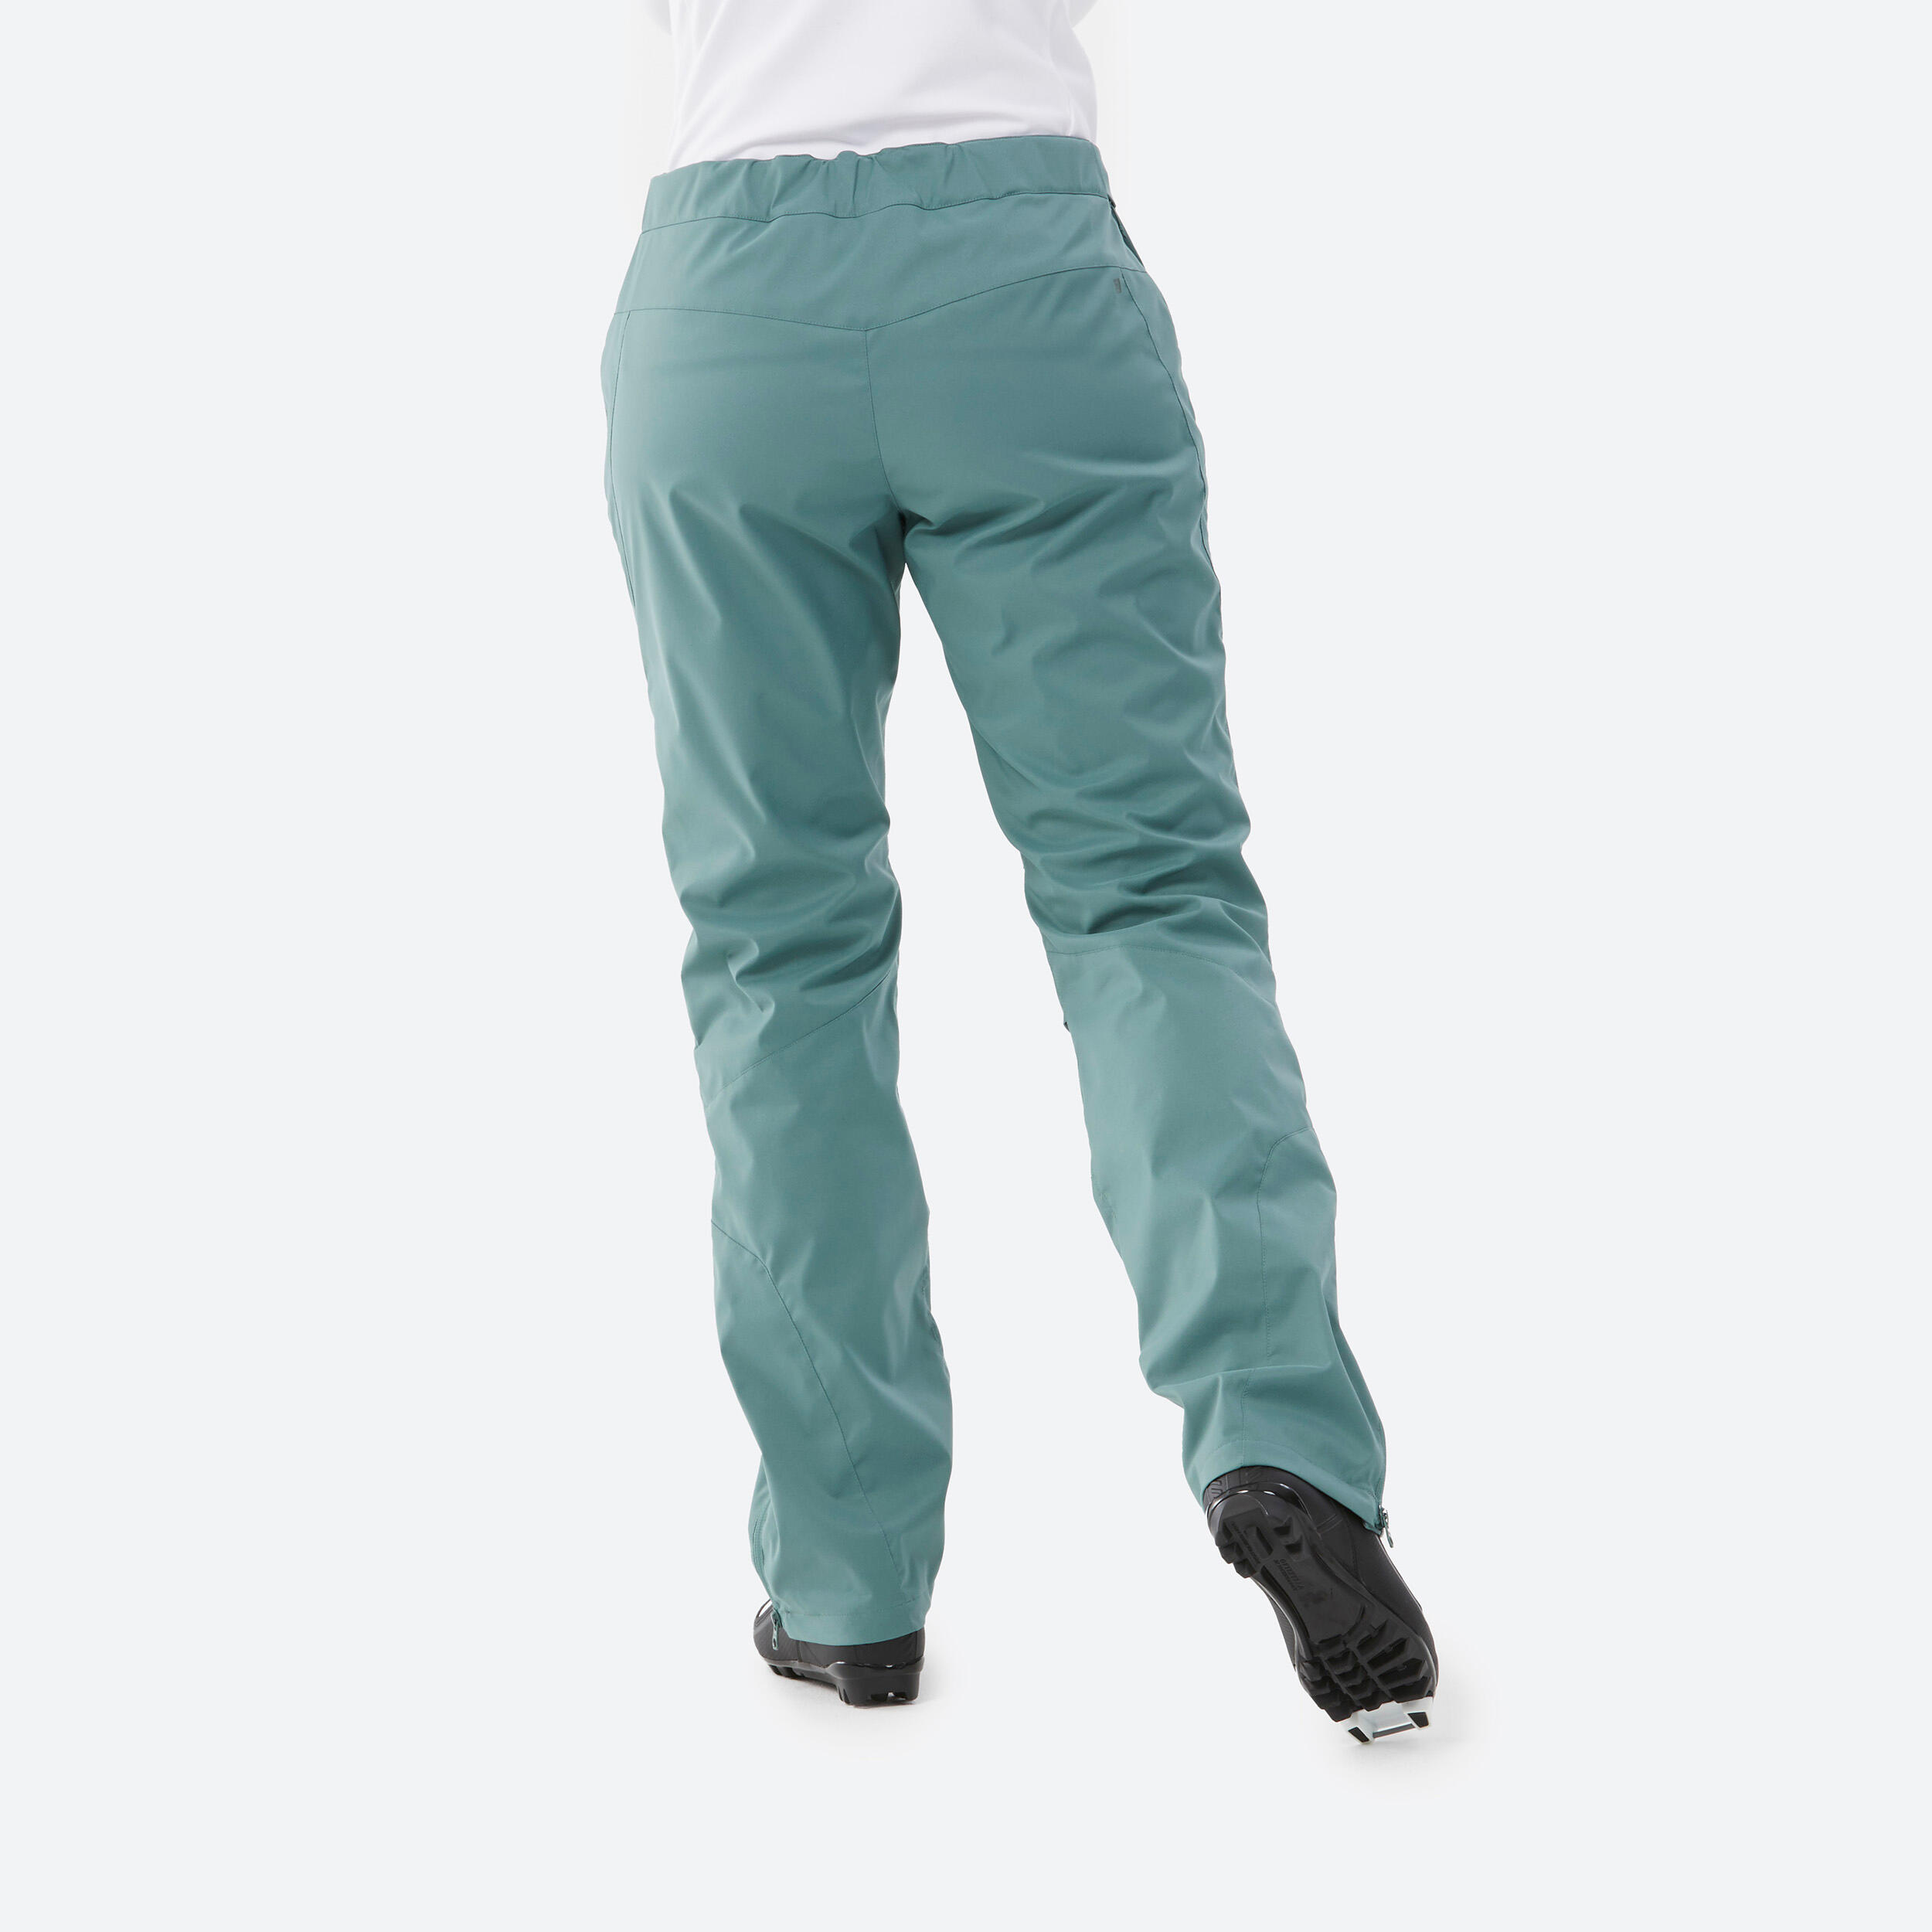 WOMEN'S 150 CROSS-COUNTRY SKI OVER-TROUSERS - GREEN 5/9